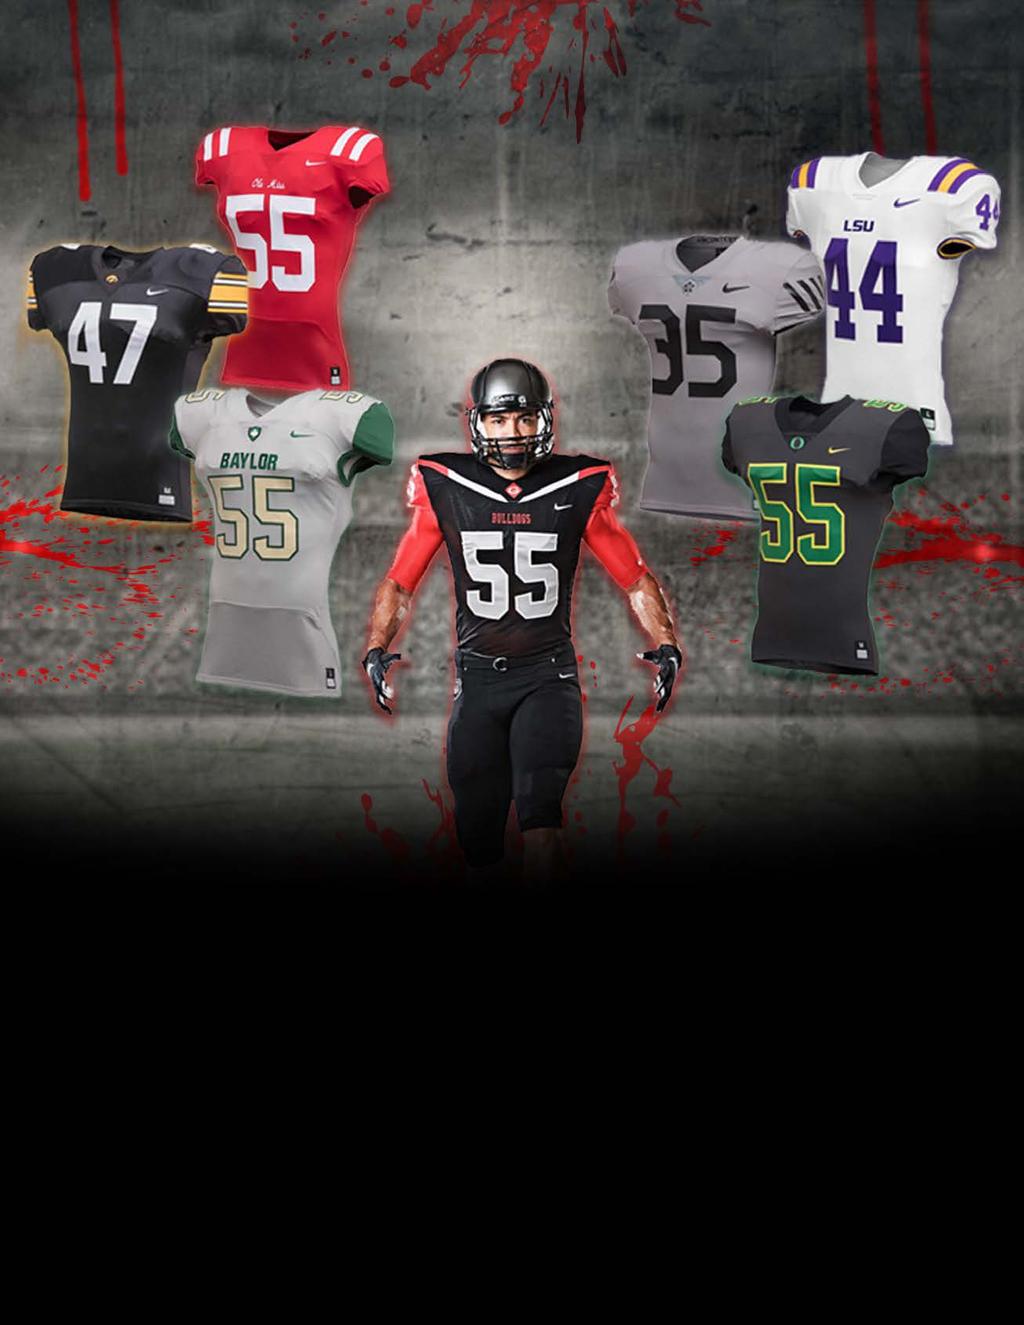 NIKE CUSTOM UNIFORMS CUSTOMIZE TO YOUR SPECIFIC NEEDS EVERYTHING FROM MATERIALS TO SHOULDER SLEEVE OPTIONS AND COLOURS.